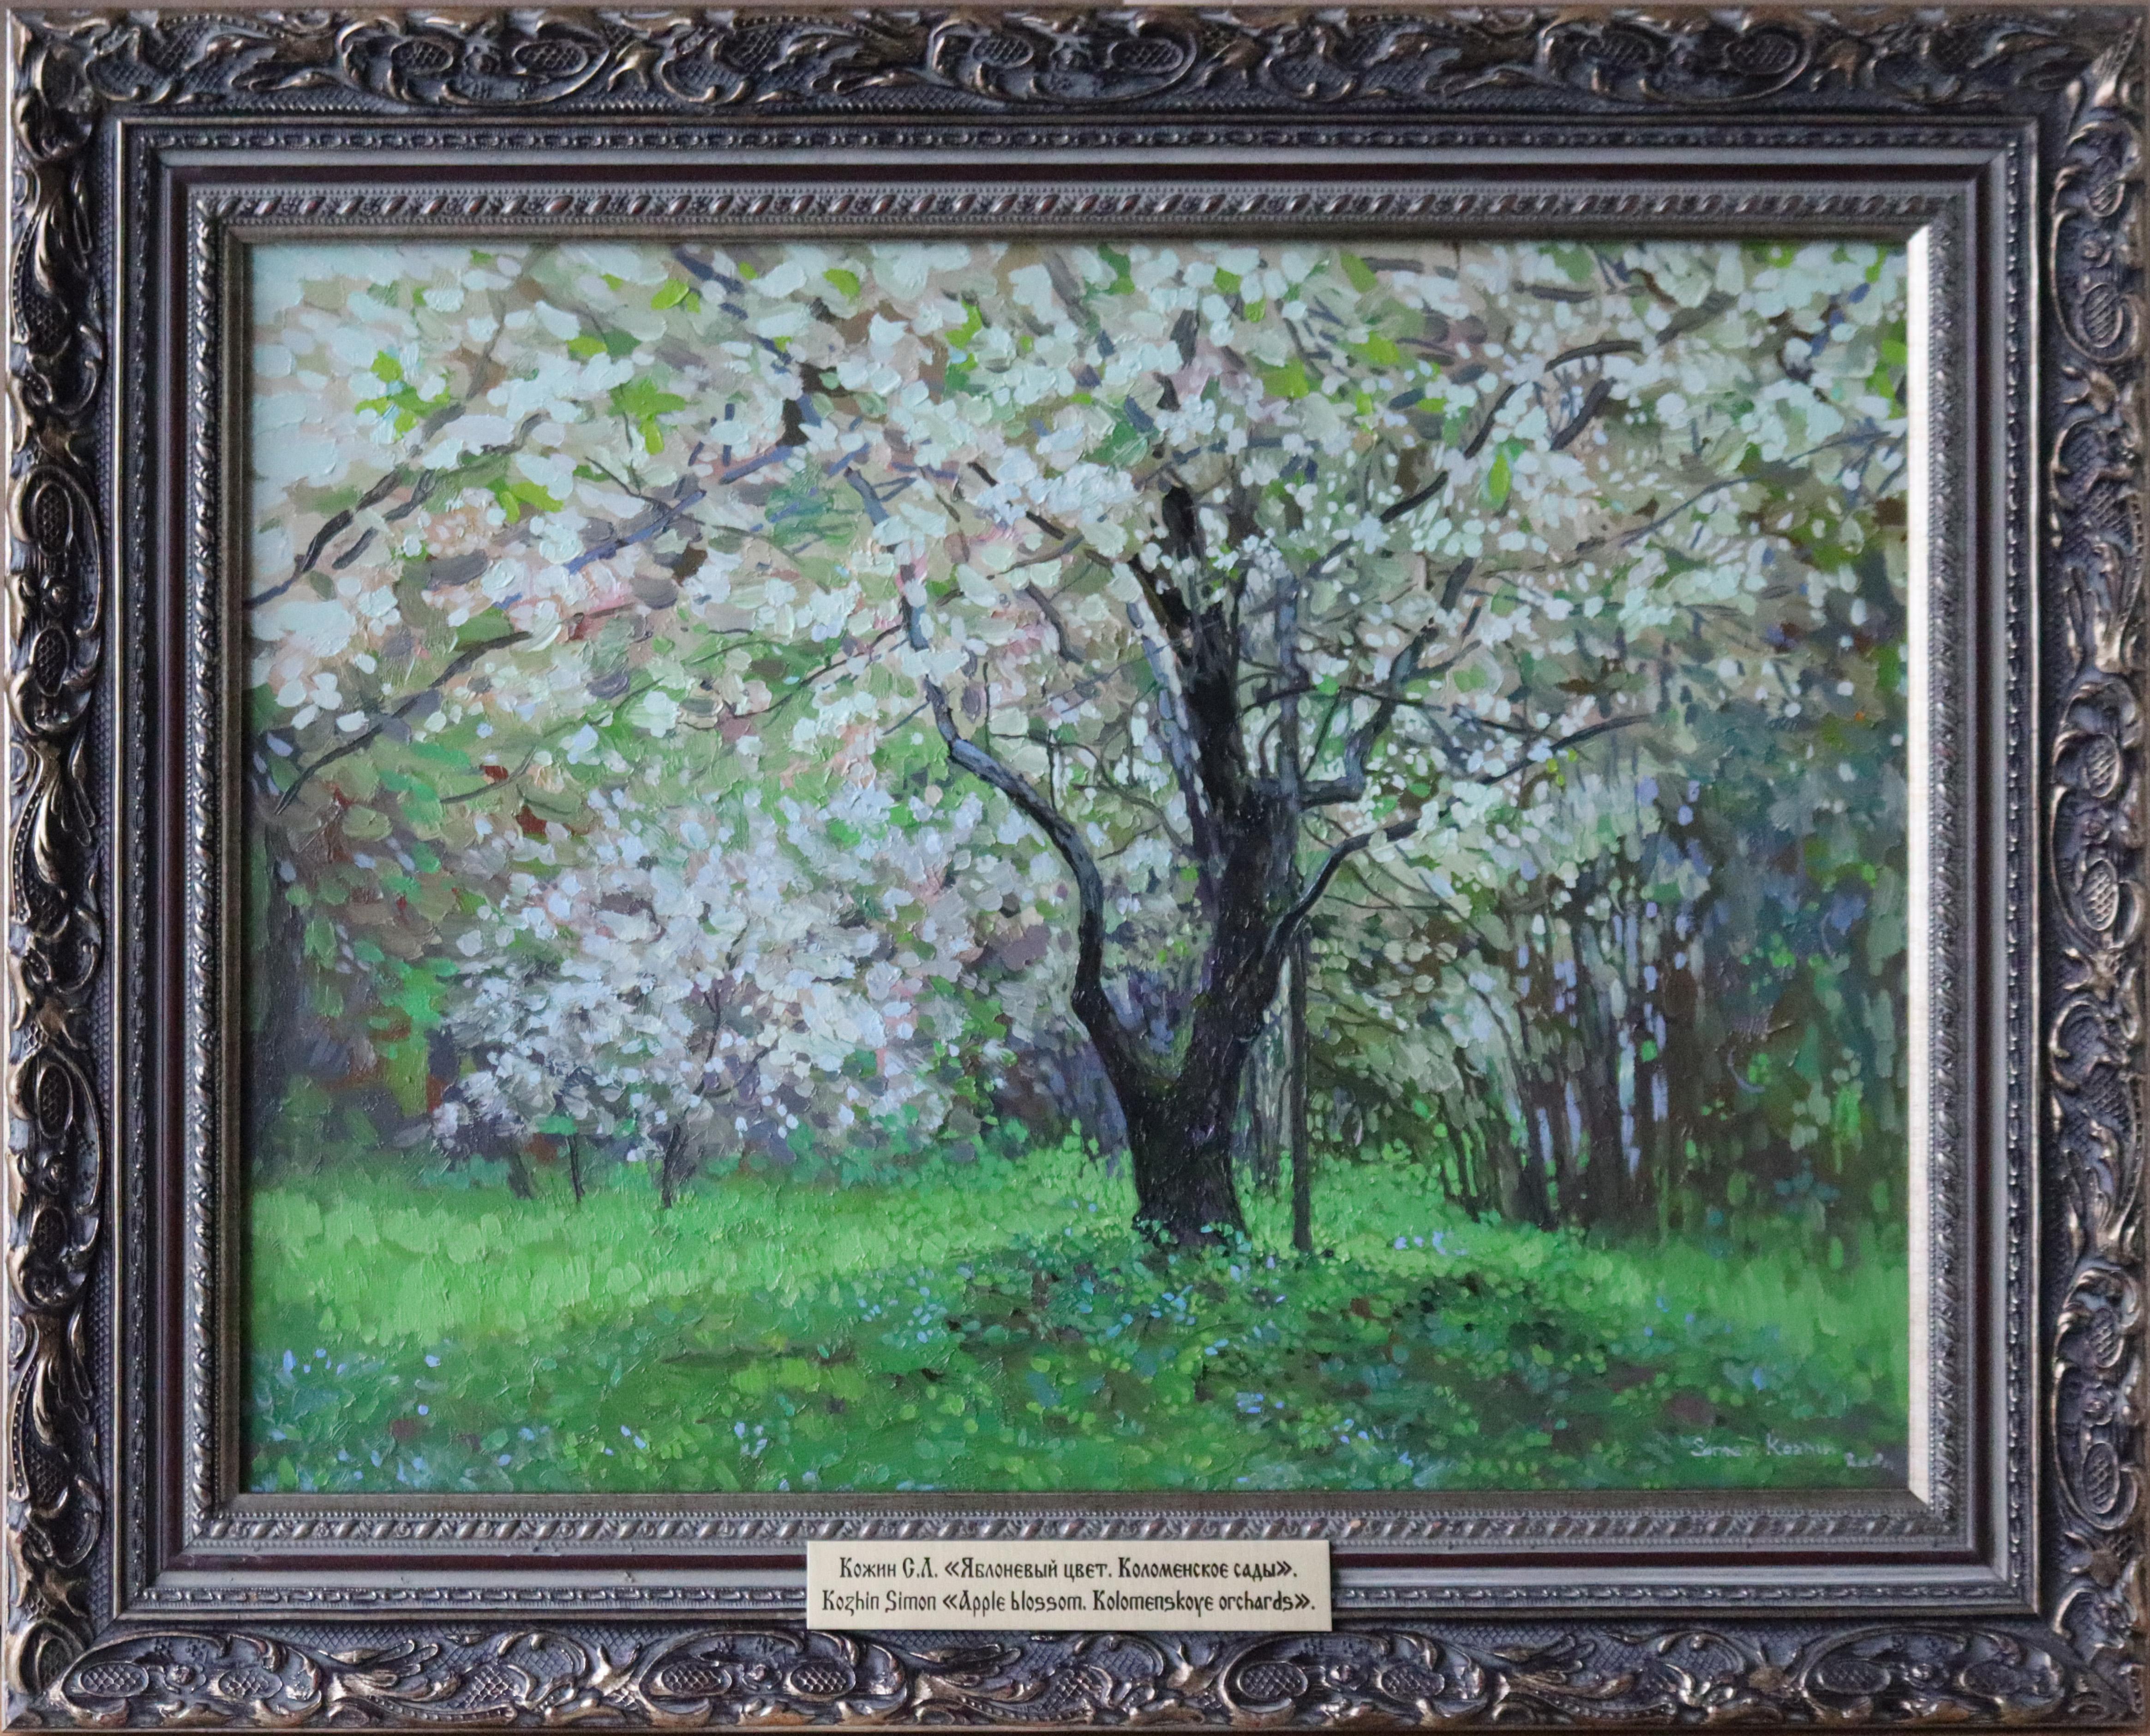 PLEASE NOTE: Shipping WITHOUT frame. Framing option on request with additional shipping costs.

This sketch was painted on a rainy day in the park at the time of flowering. It is on a rainy day that you feel the smells of spring flowering especially